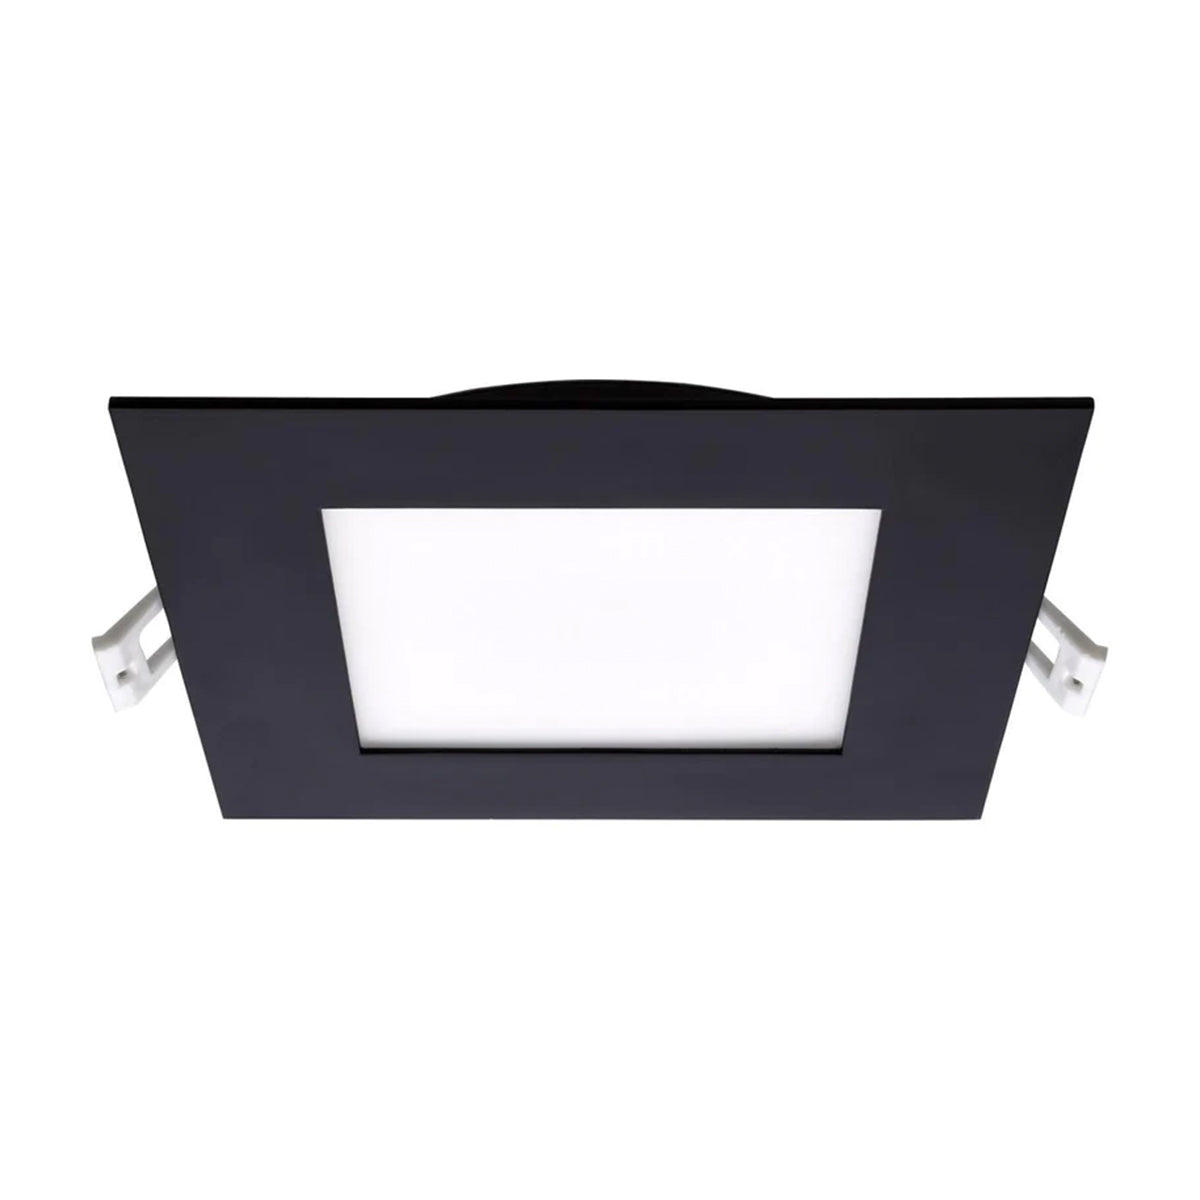 SlimFit Canless LED Recessed Light, 6 inch, Edge-Lit, Square, 12 Watt, 750 Lumens, Selectable CCT, 2700K to 5000K, Ultra Thin